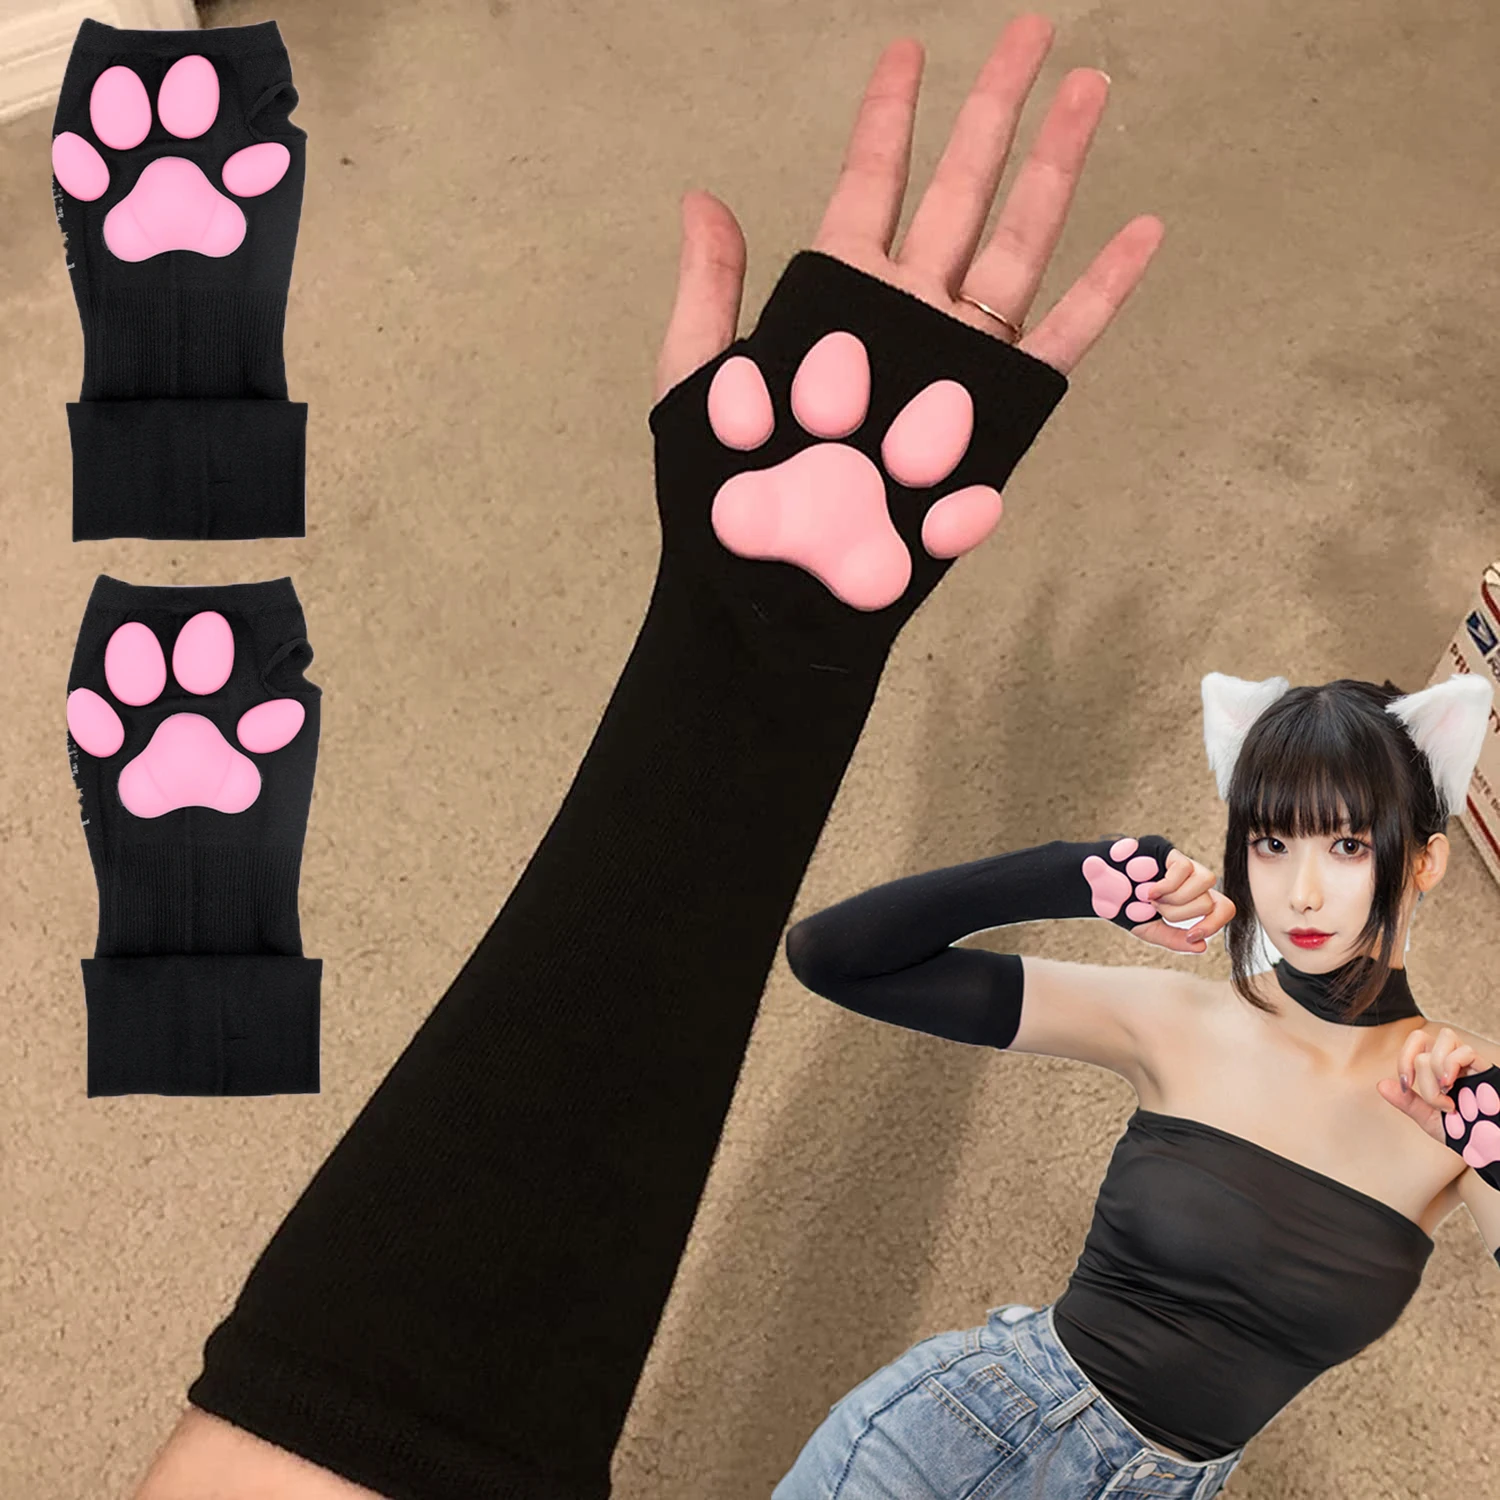 3D Cat Pad Paw Sleeves Sun Protection Cute Kitten Cat Paw Sexy Lolita Cosplay Arm Sleeves Cat Meat Cushion Gloves Sun Sleeves 3d cute cat claw sunscreen sleeve sun protection gloves kawaii cat claw fingerless sleeves lolita cosplay mitten accessories